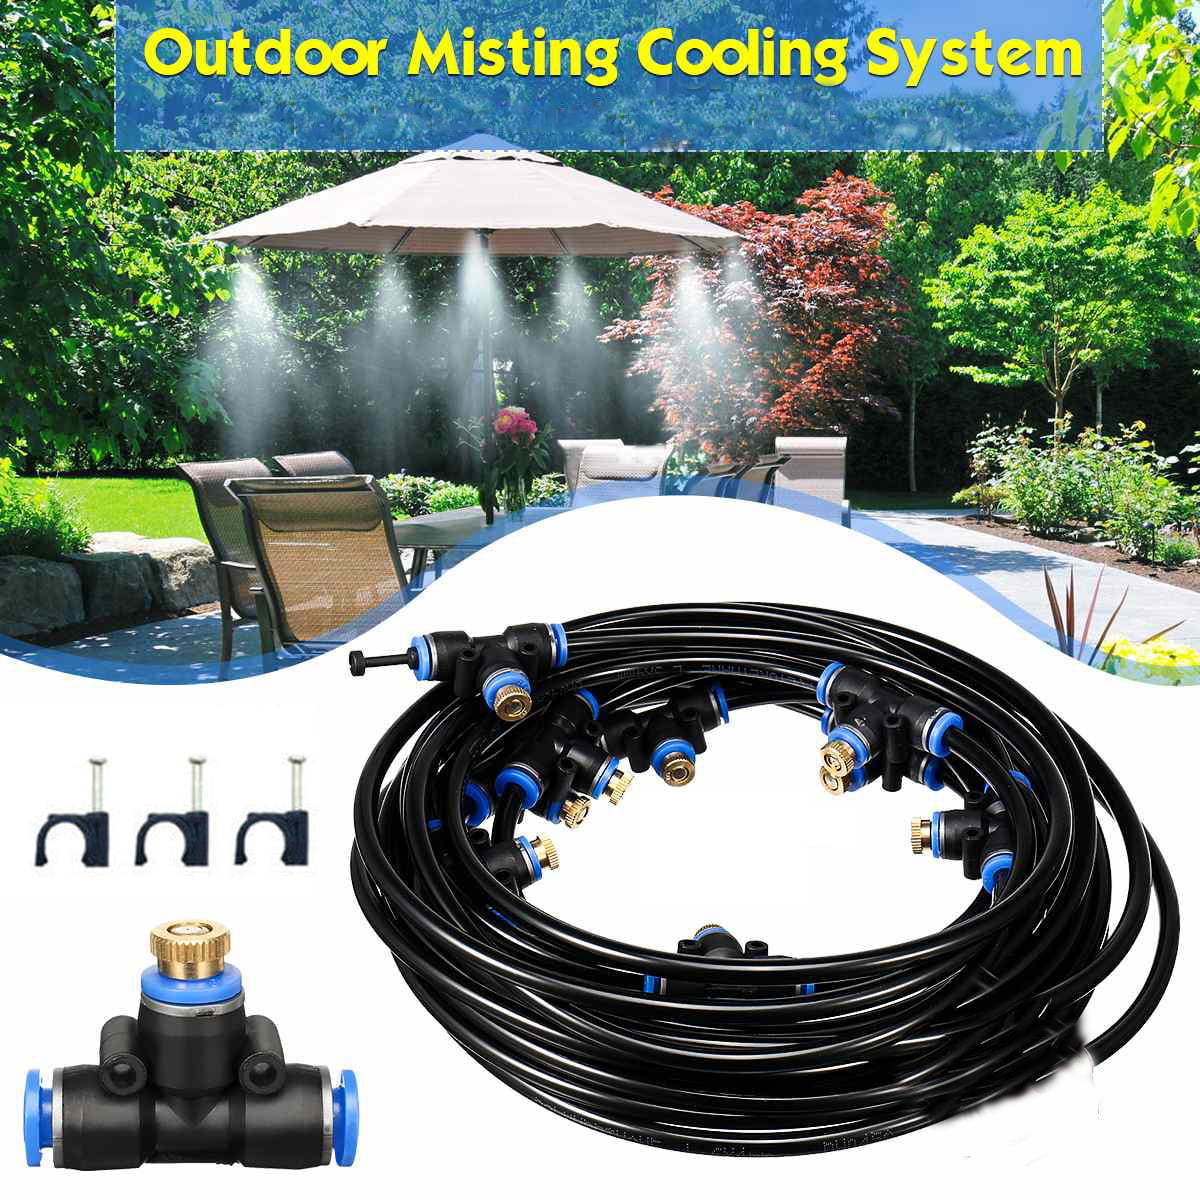 Details about   30FT Misting Cooling System Outdoor Lawn Garden Greenhouse Irrigation Nozzles 